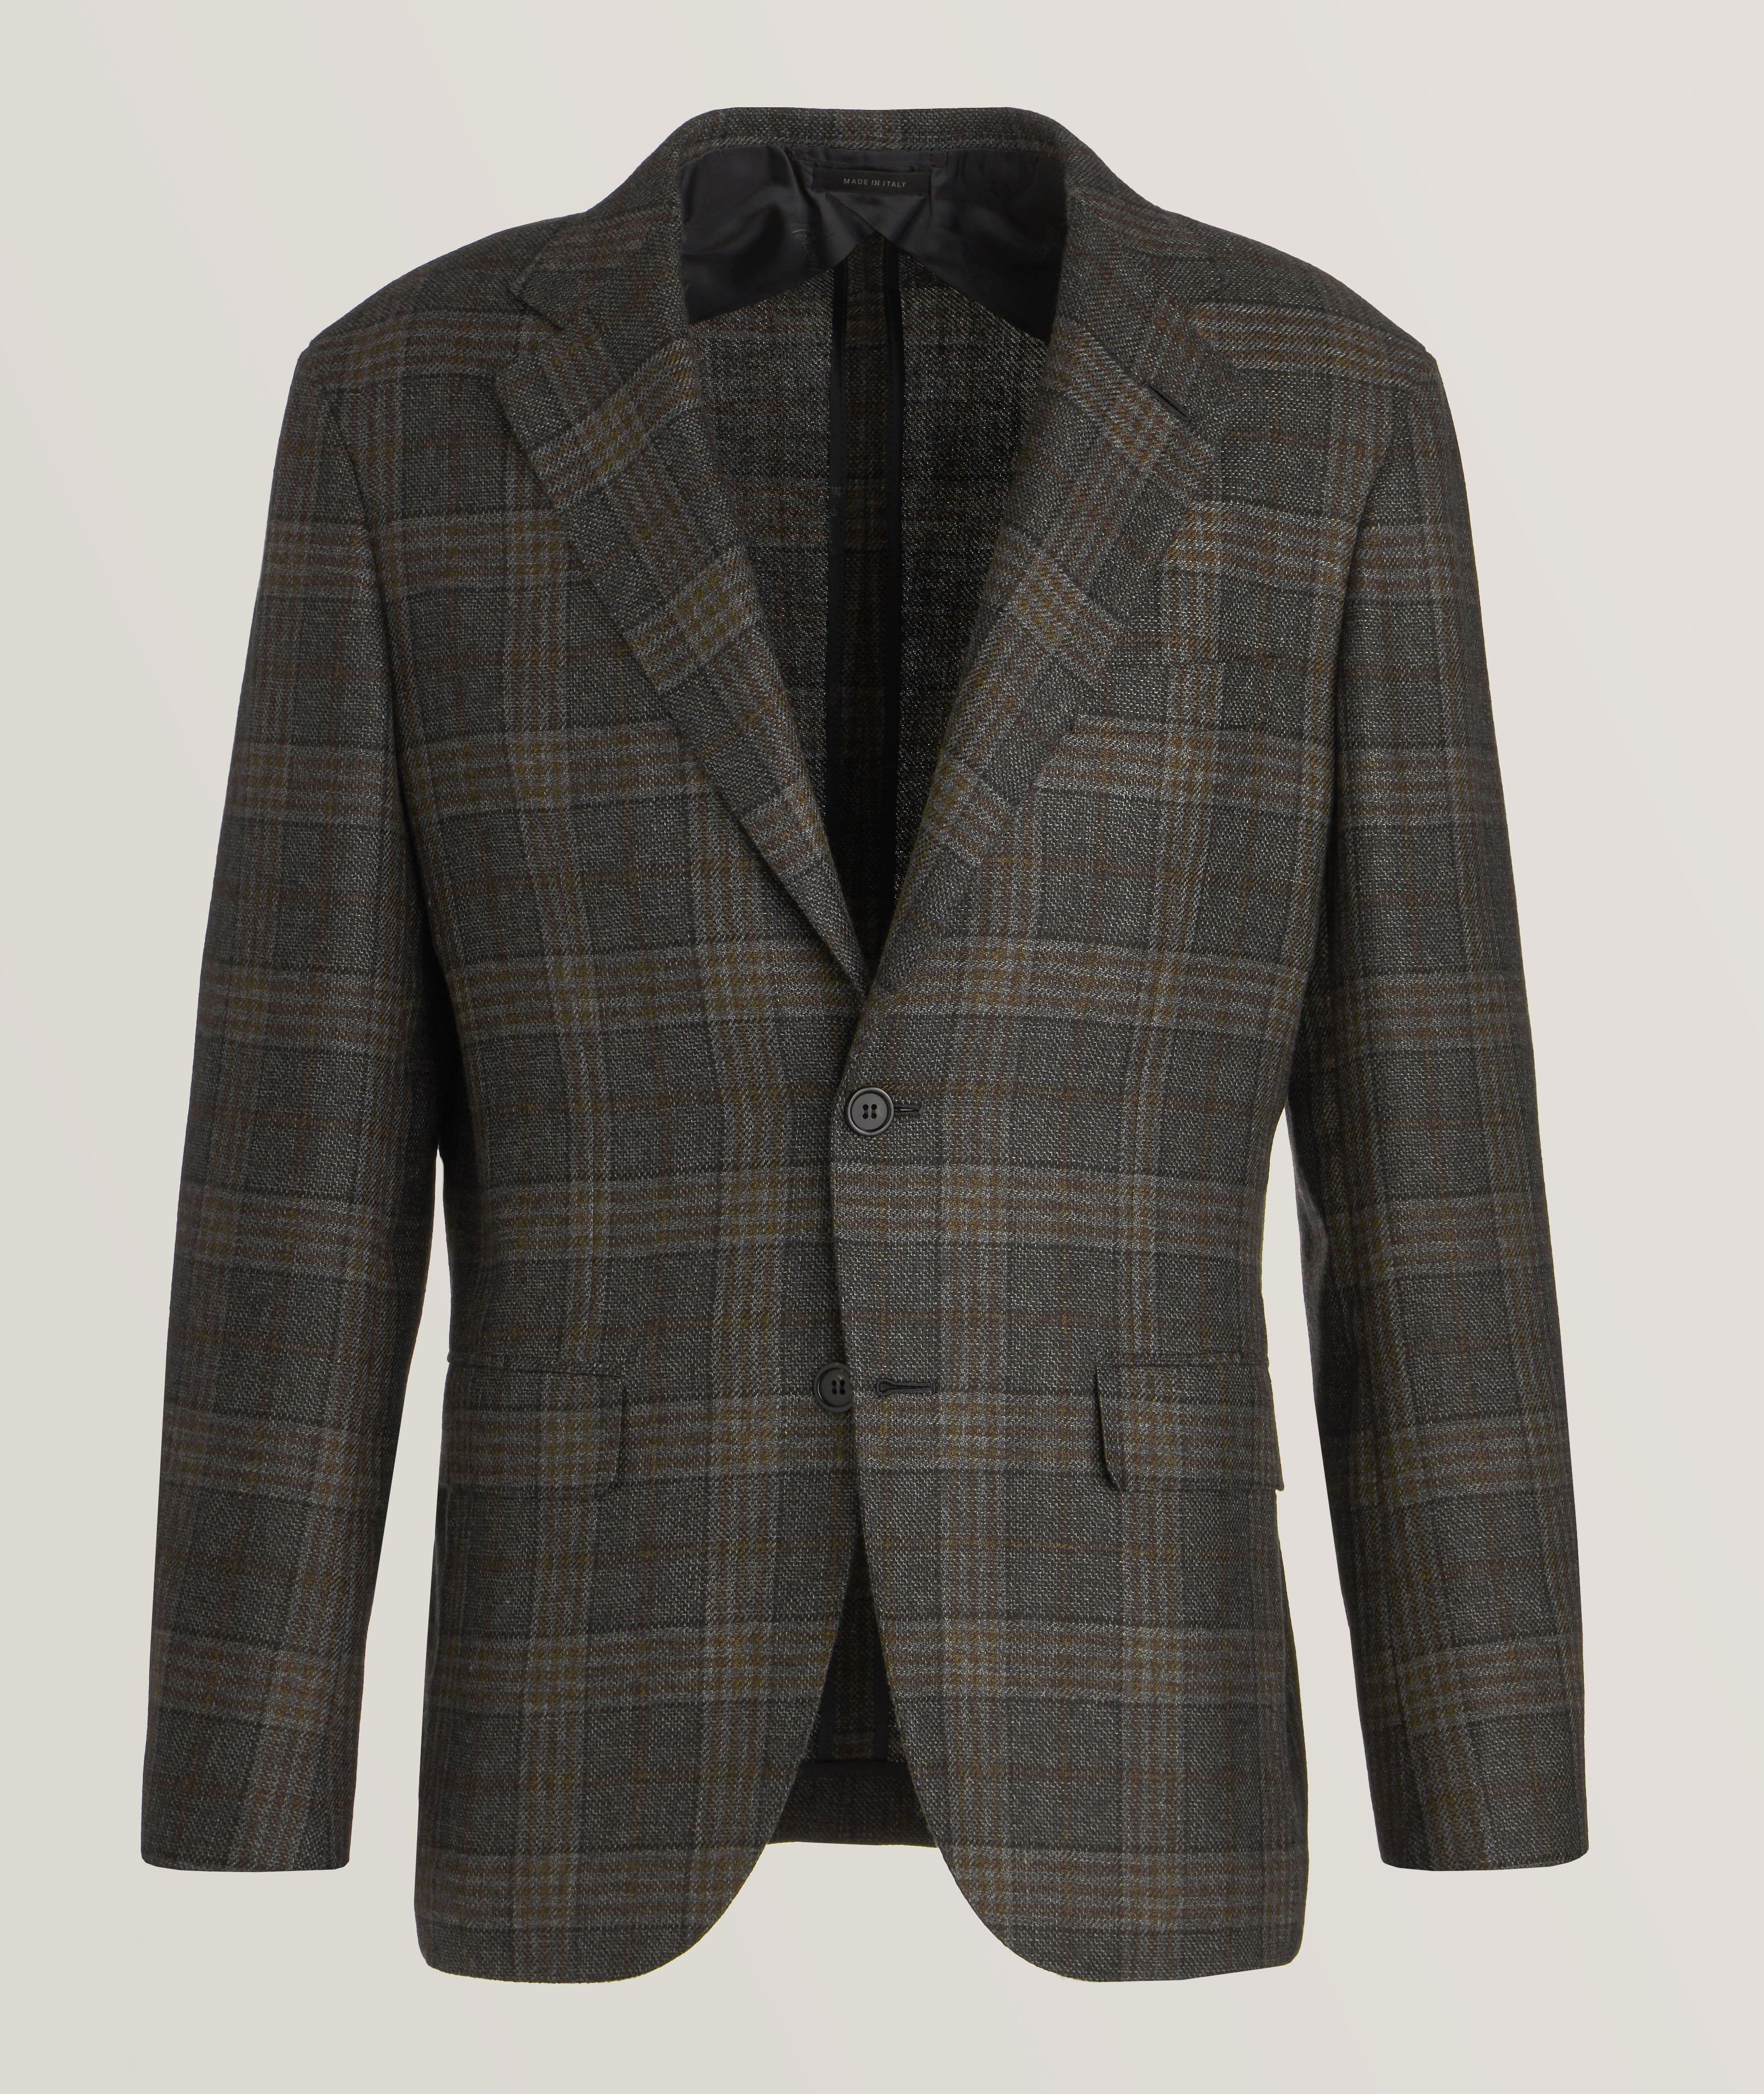 New Plume Prince Of Wales Cashmere Sport Jacket